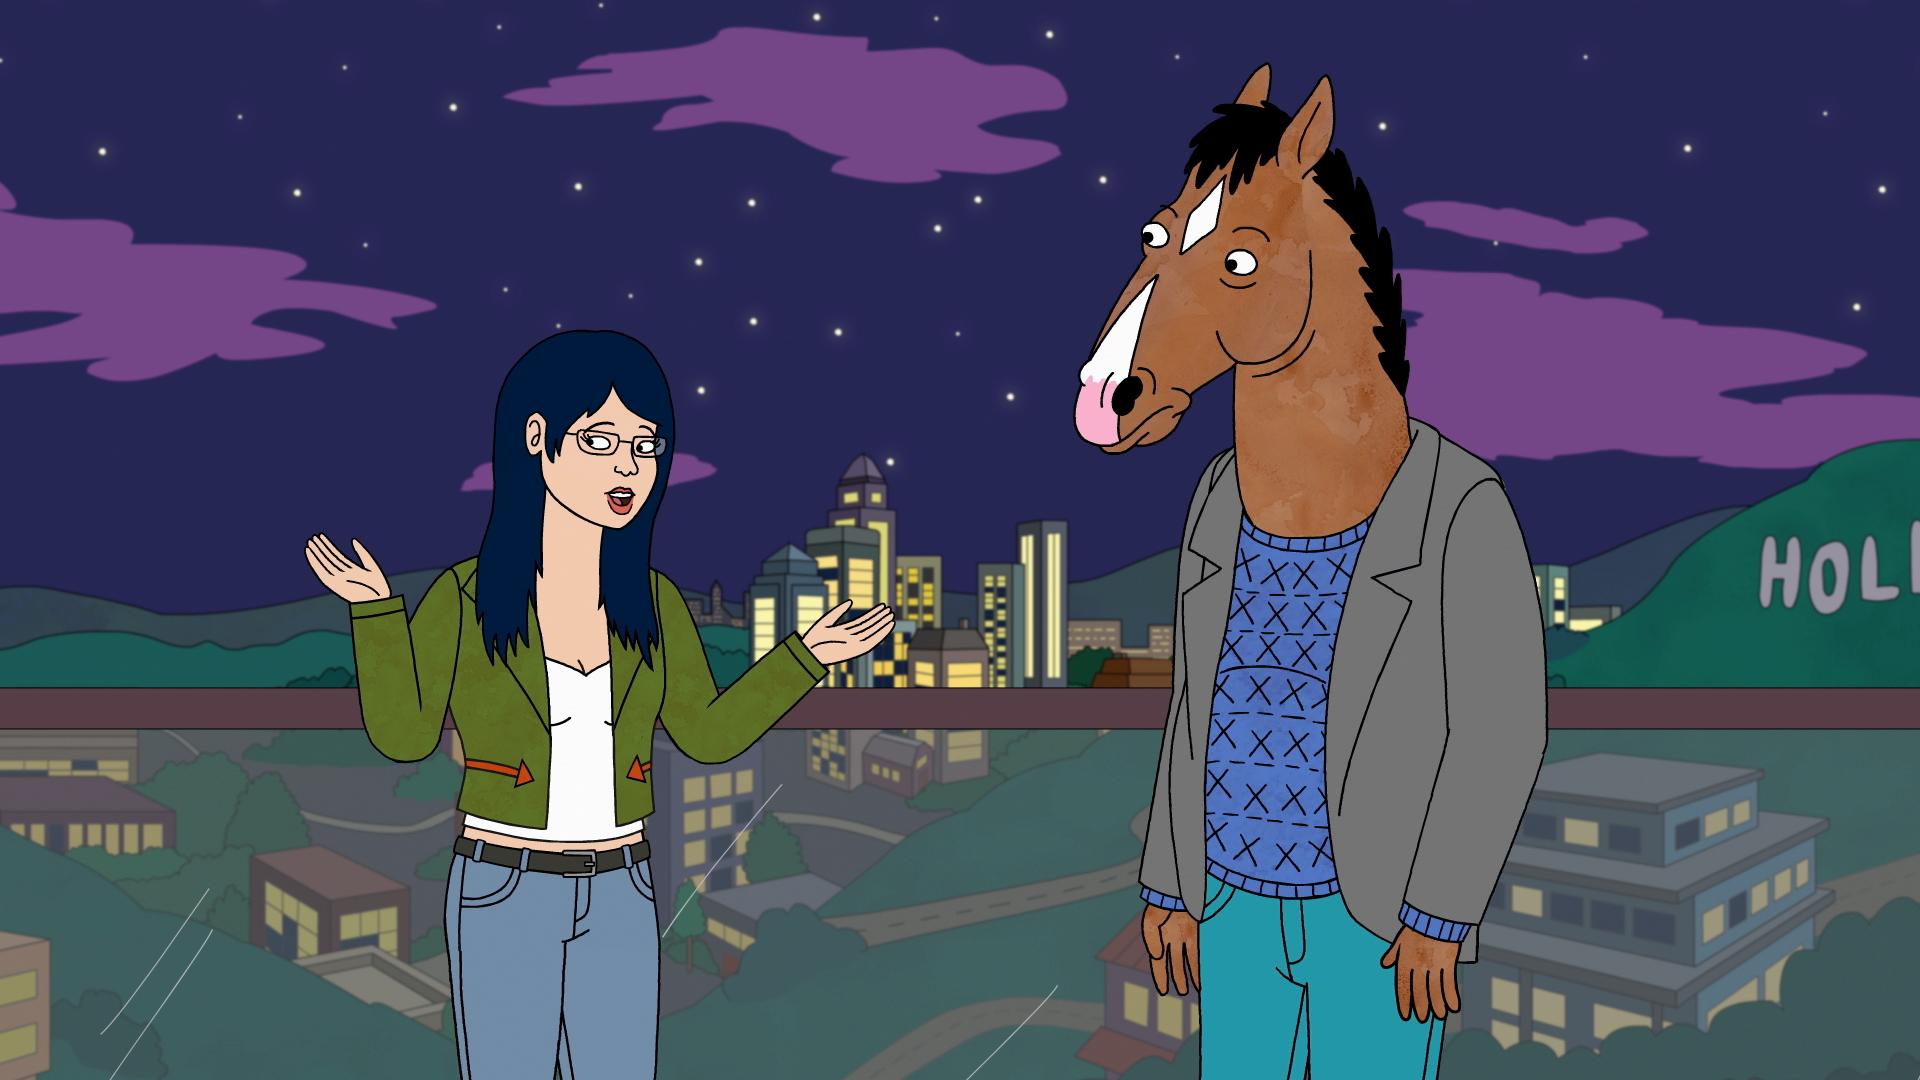 Diane (left, voiced by Alison Brie) and Bojack (right, voiced by Will Arnett) in Netflix's "BoJack Horseman." Photo courtesy of Netflix.